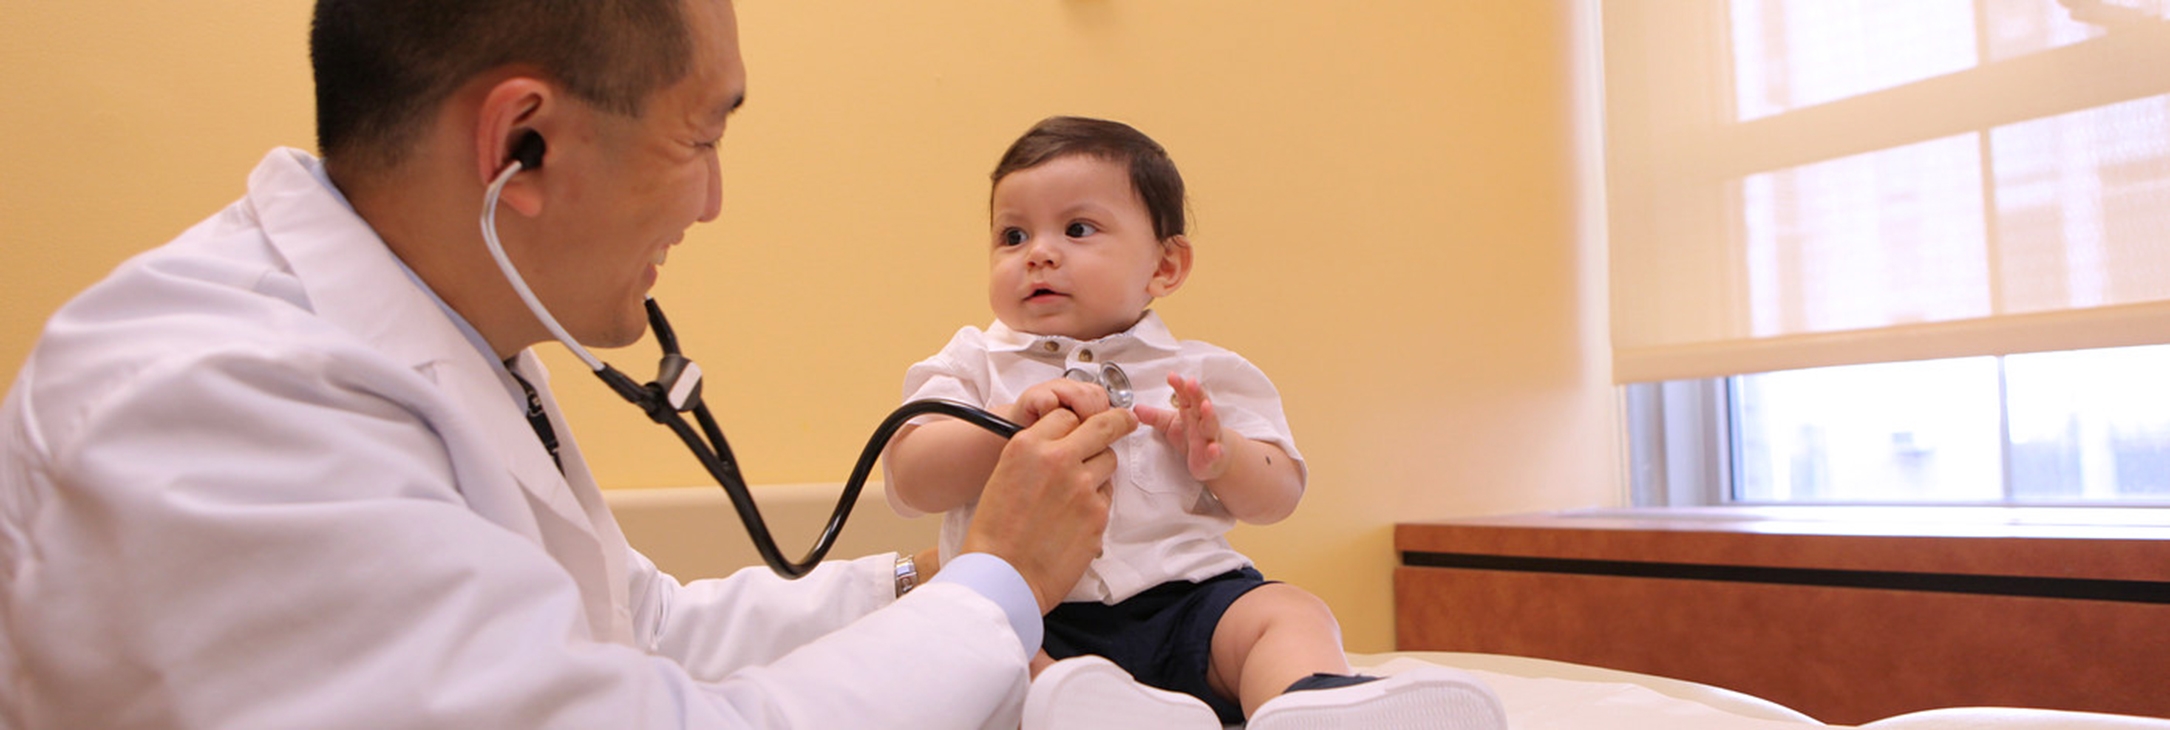 Weill Cornell Medicine physician examining young patient.